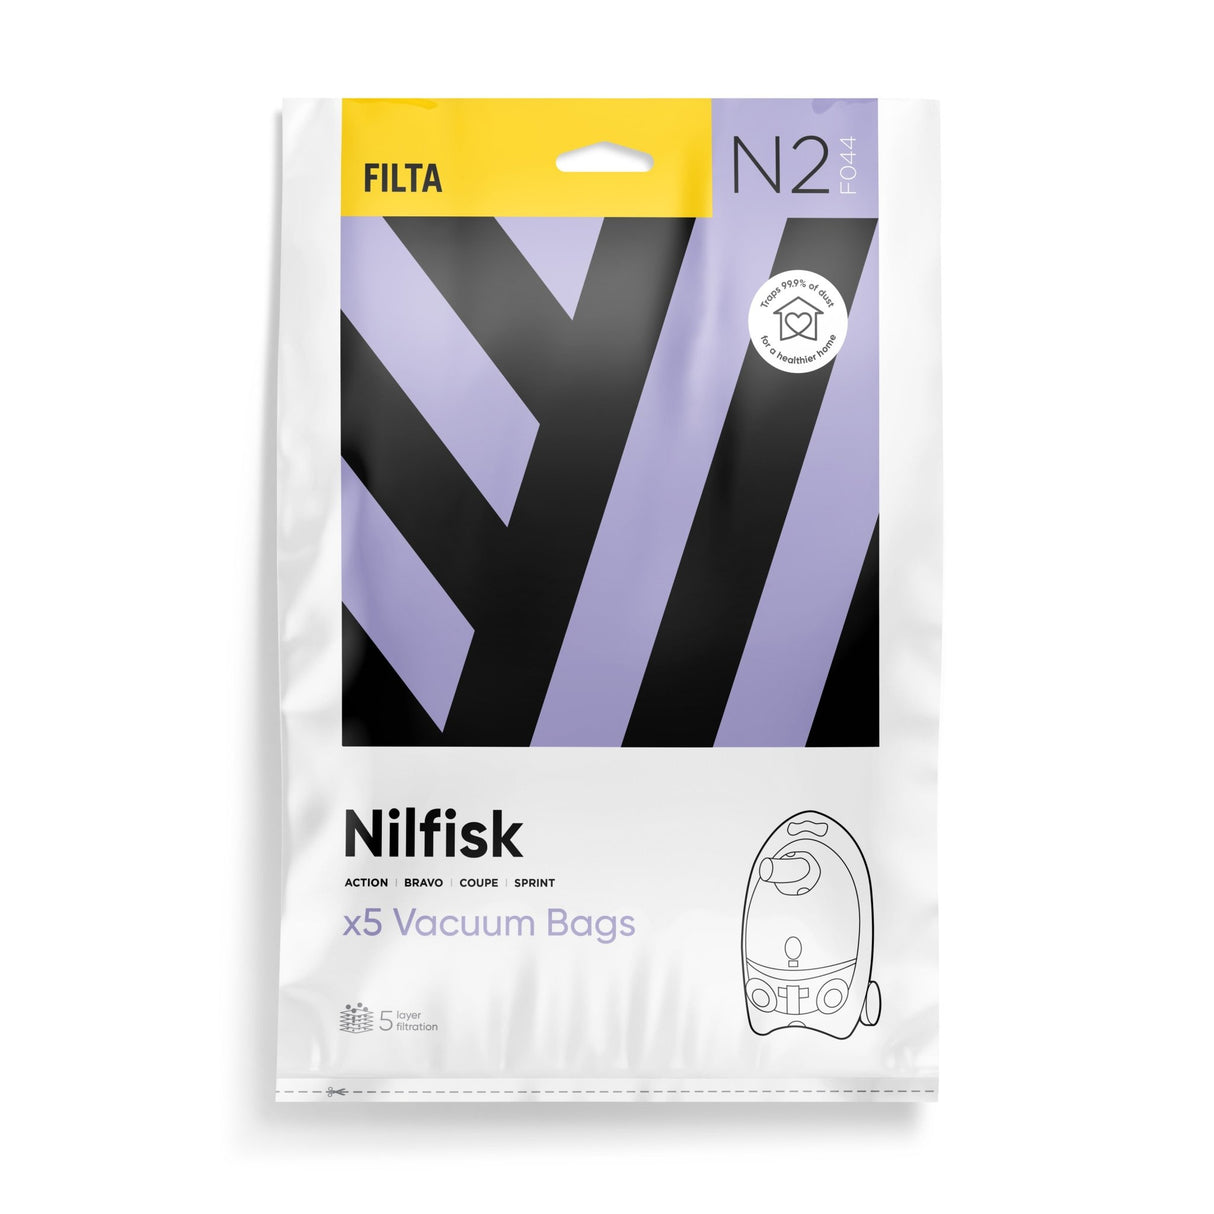 N2 - FILTA NILFISK SPRINT SMS MULTI LAYERED VACUUM CLEANER BAGS 5 PACK (F044) - Cafe Supply